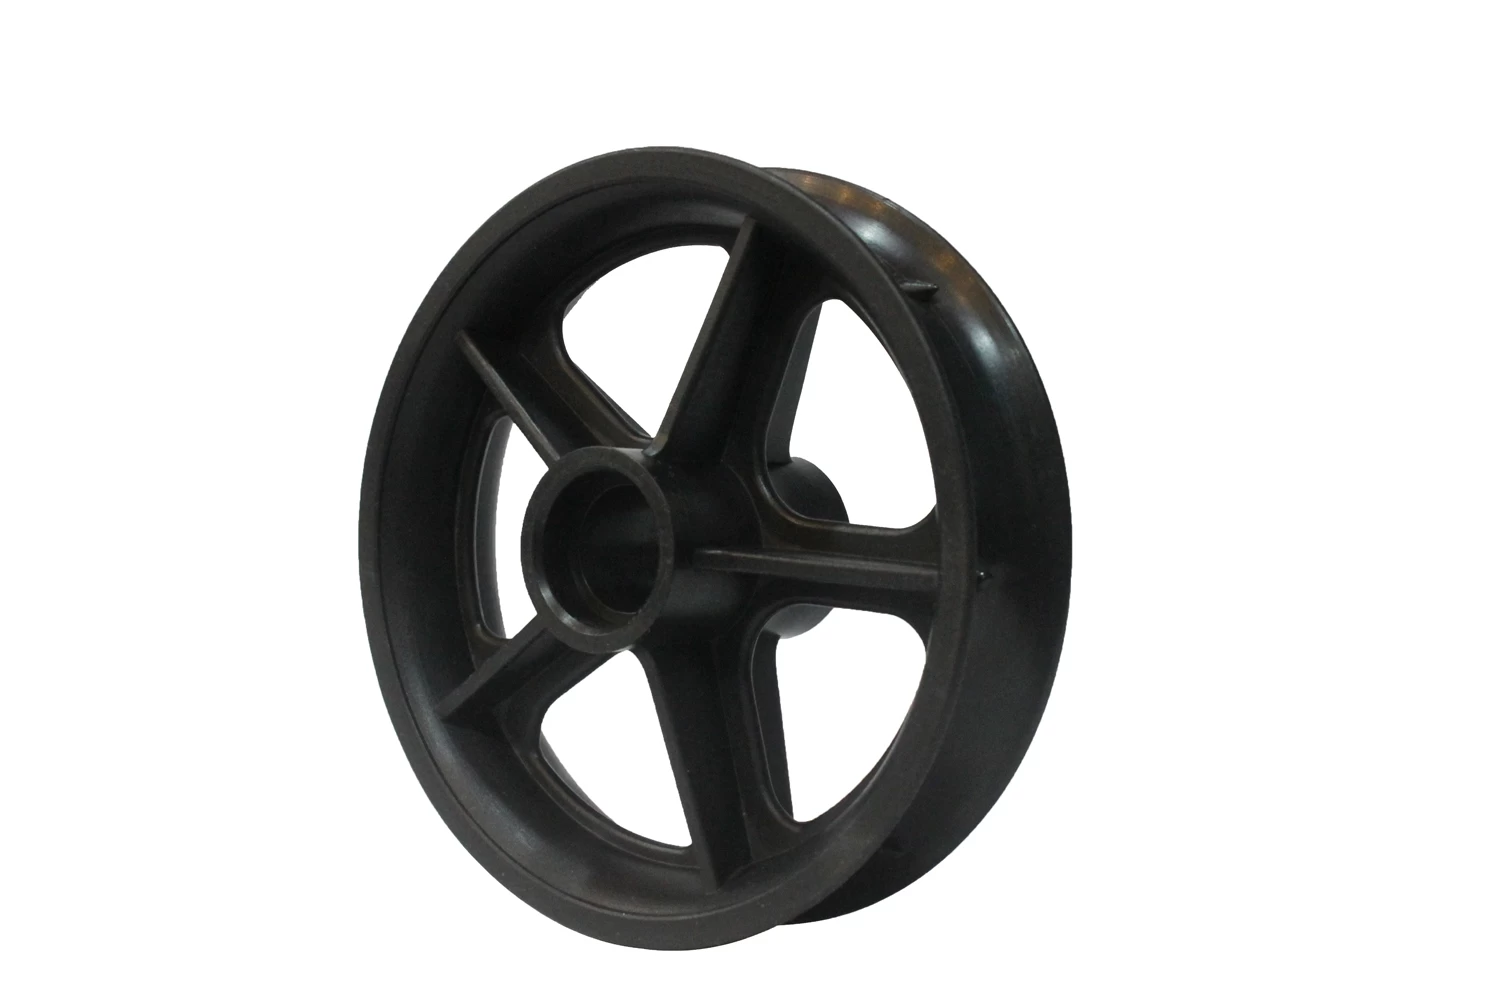 China whole flat free solid wheel,Solid Tires,pu foam tire,polyurethane tire fill Hersteller